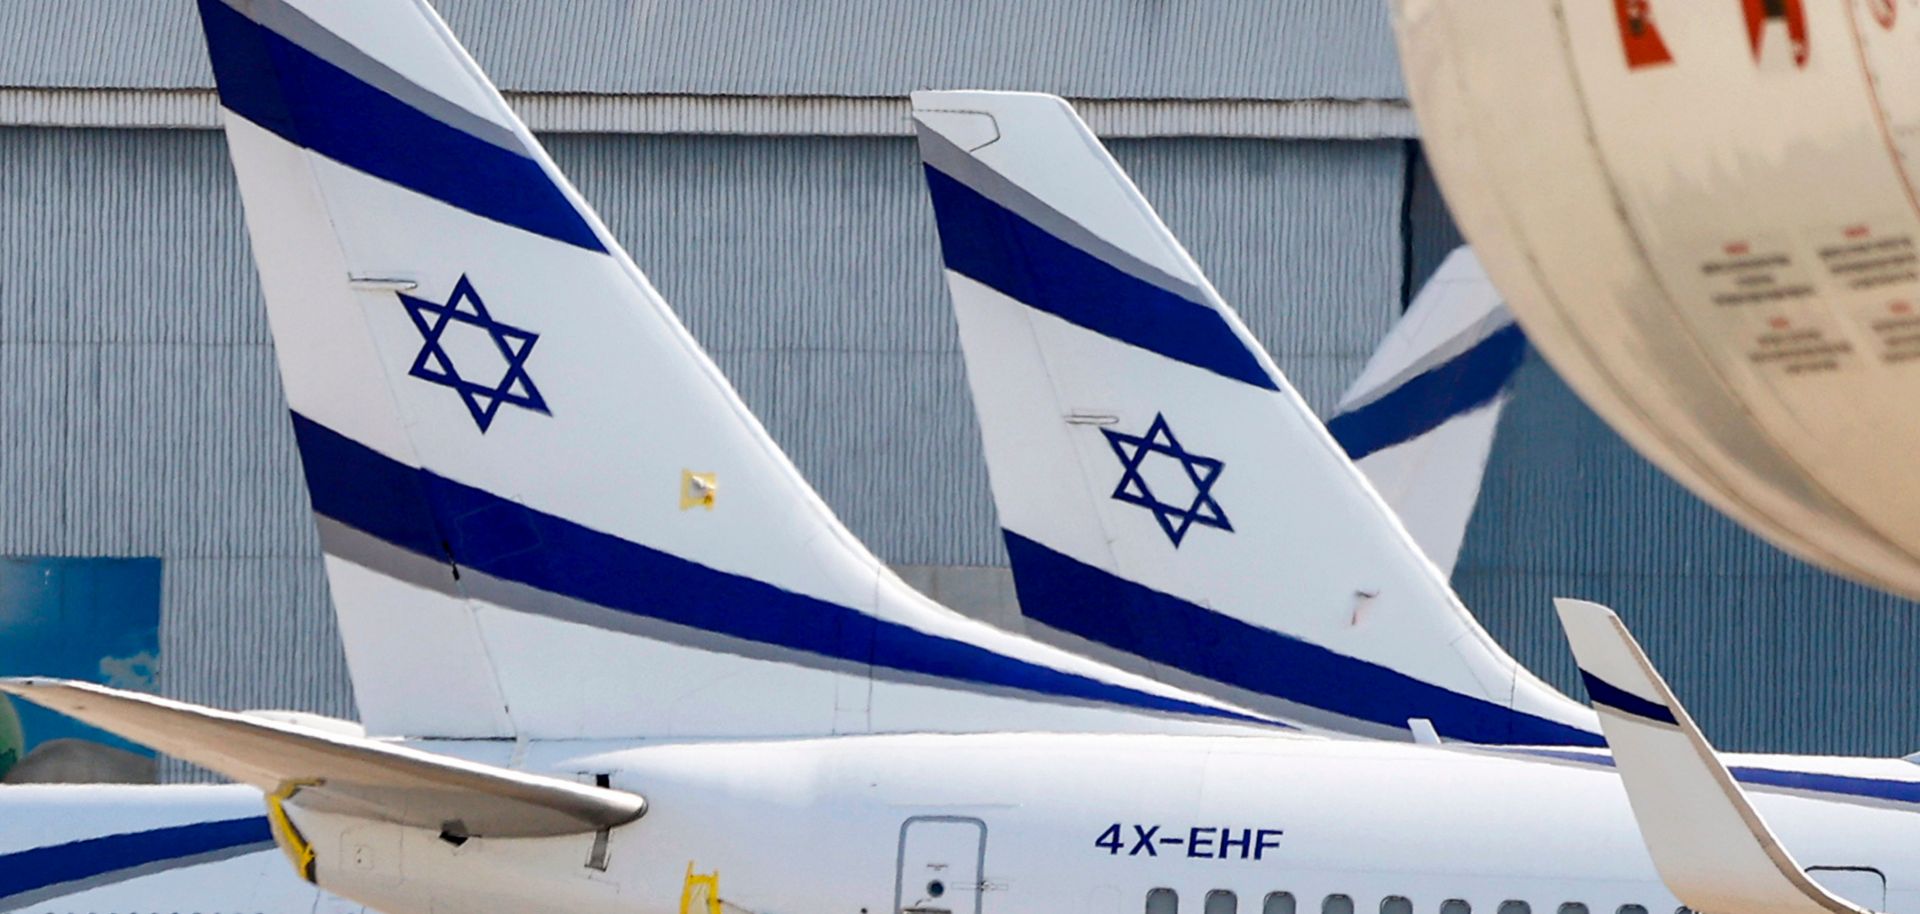 El Al aircraft on the tarmac in August 2020 at Israel's Ben Gurion Airport in Lod.